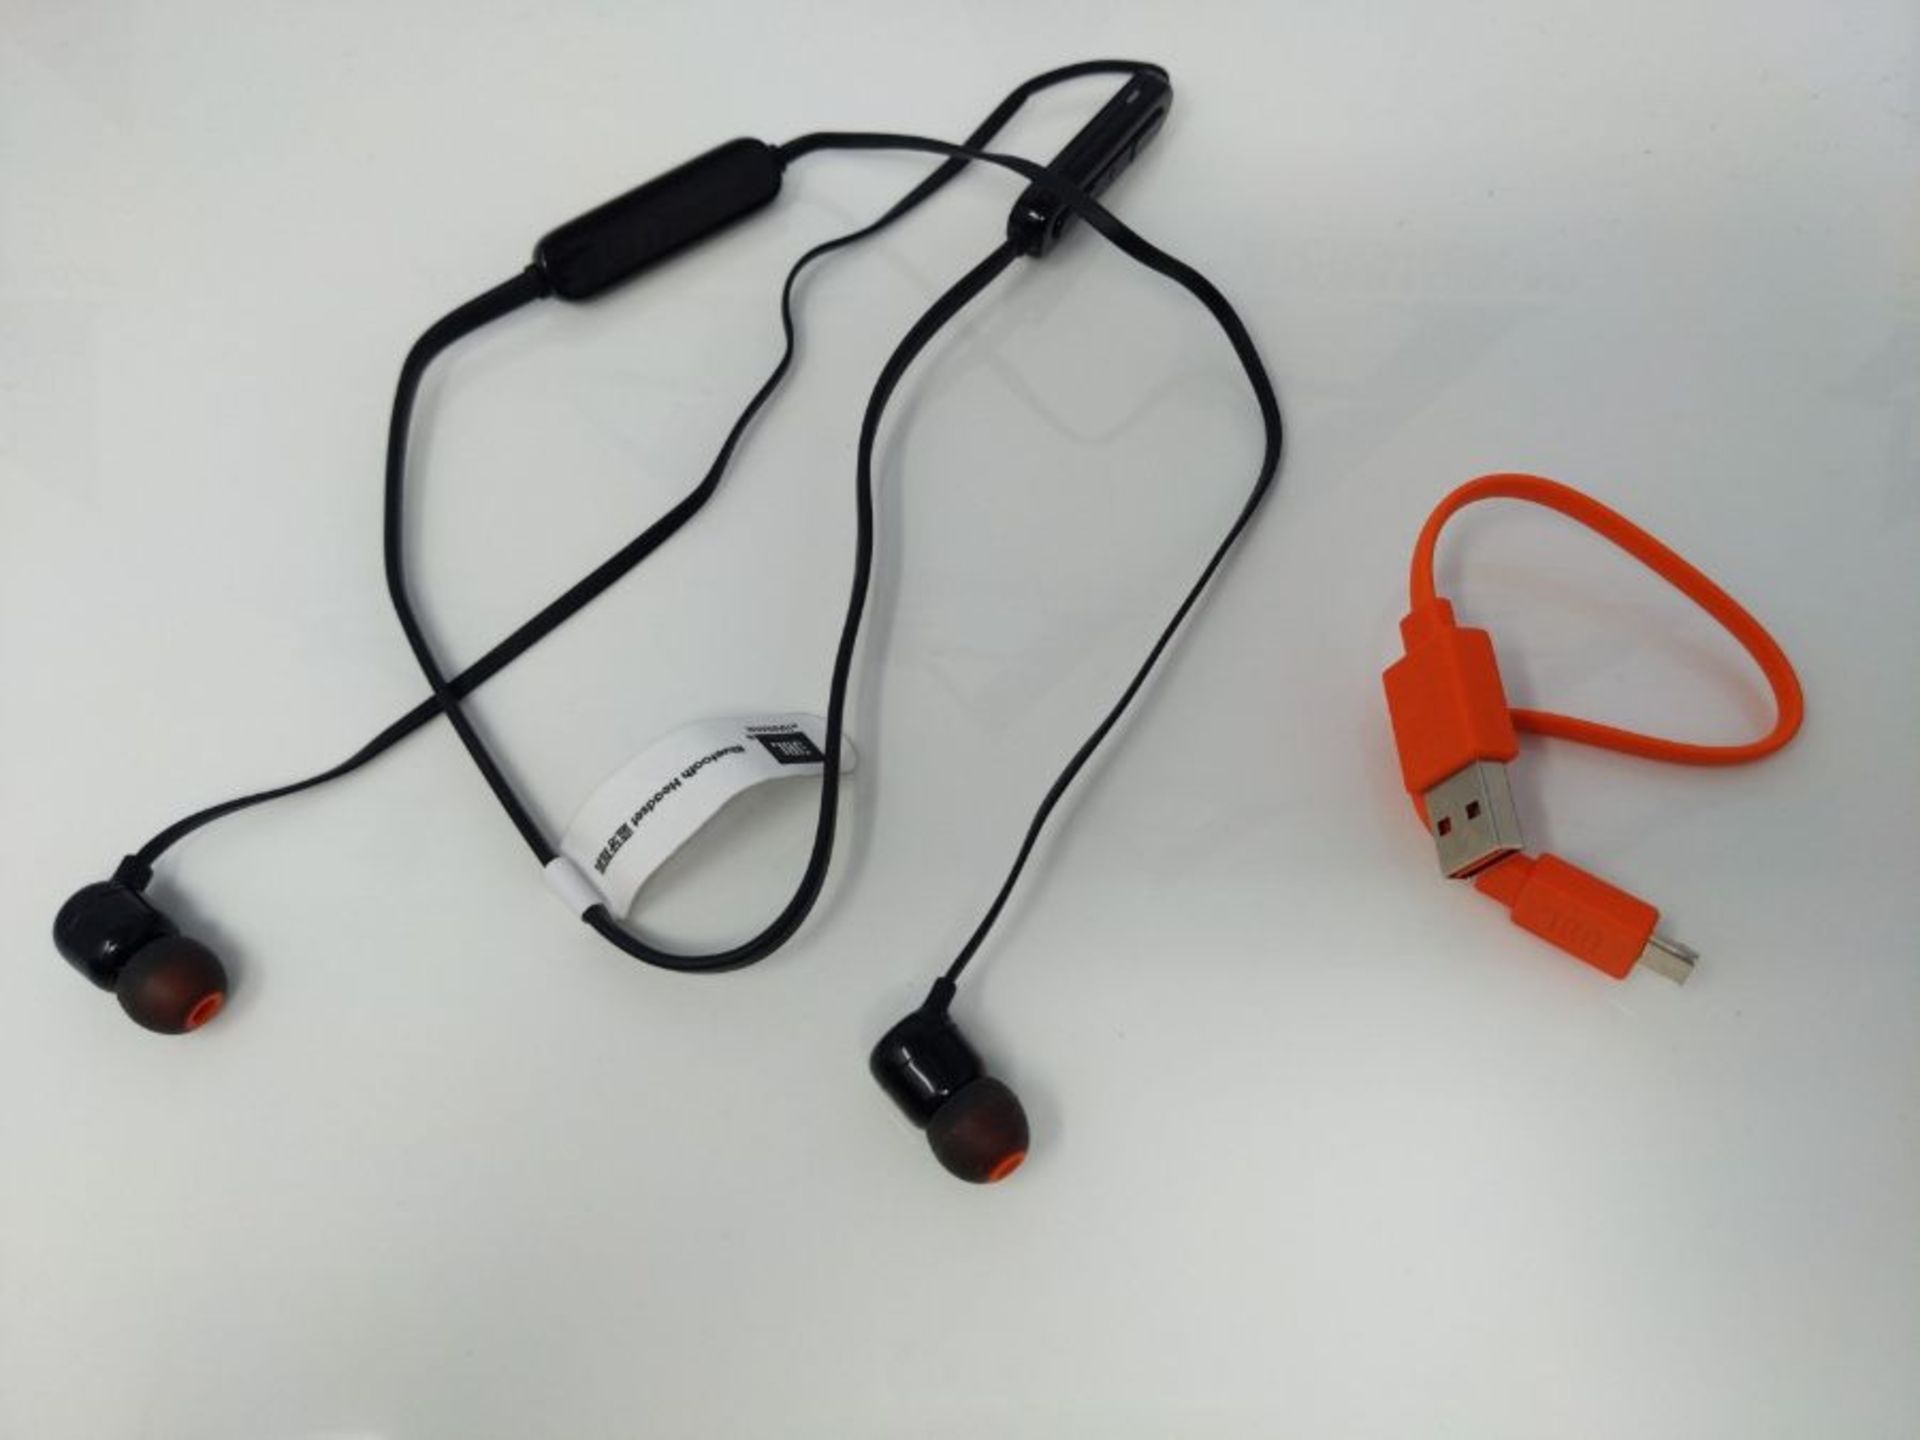 JBL TUNE 110BT Wireless In-Ear Headphones with Bluetooth - Neck flat tangle-free cable - Image 2 of 2